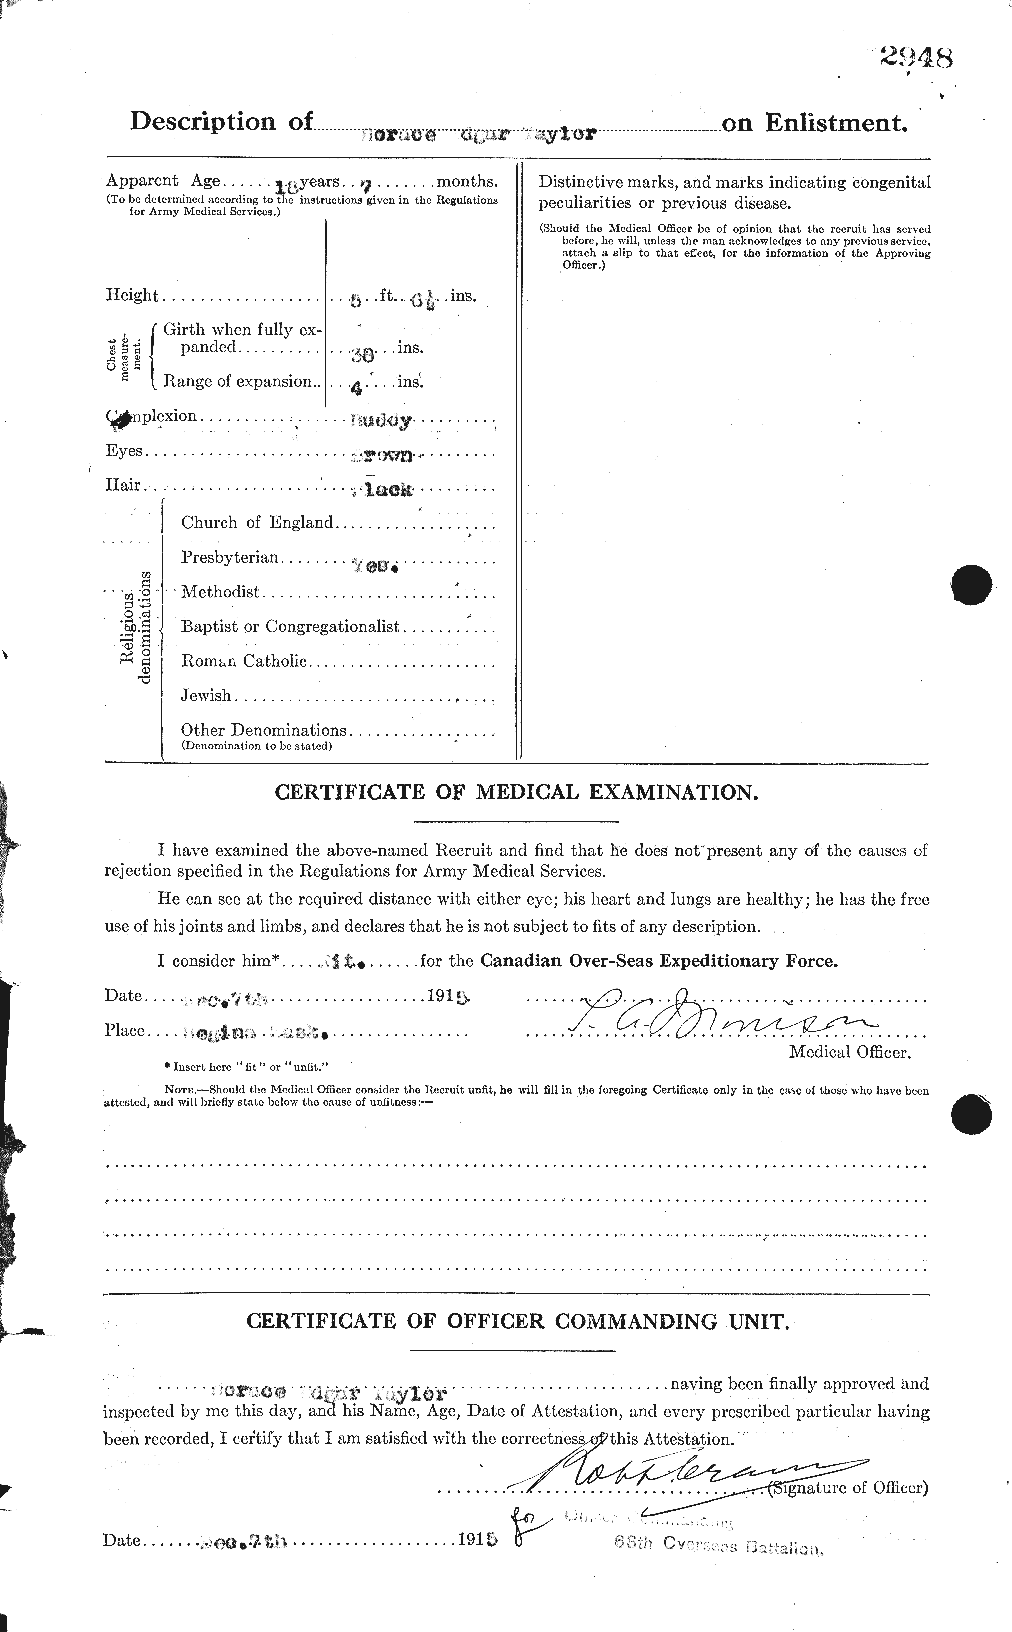 Personnel Records of the First World War - CEF 626593b